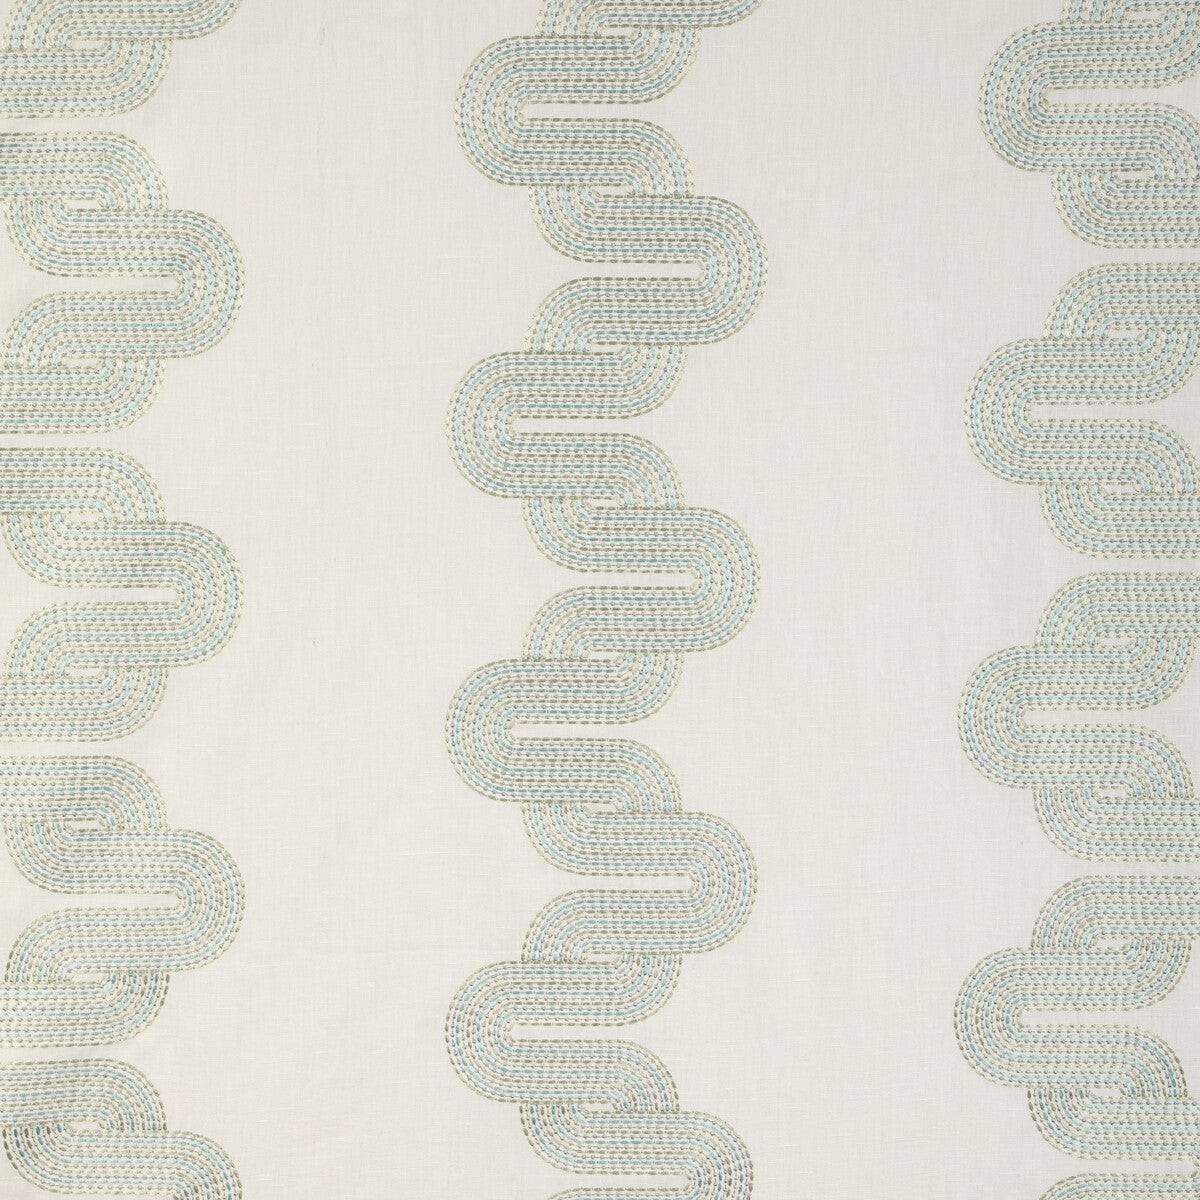 Cloud Chain fabric in grotto color - pattern 36943.13.0 - by Kravet Design in the Alexa Hampton collection